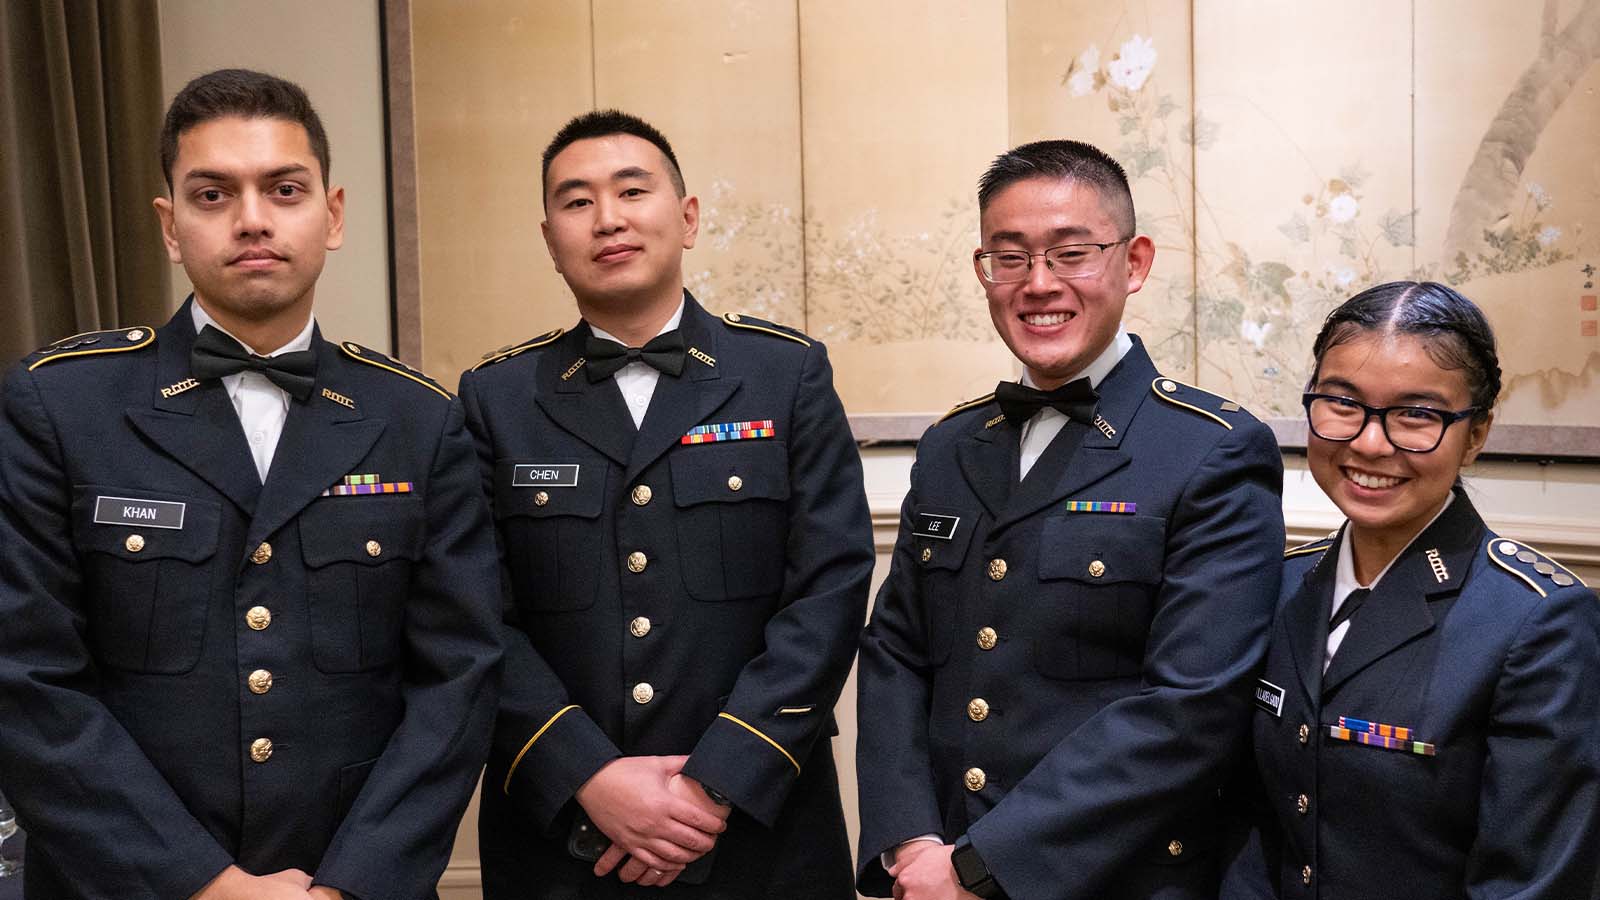 ROTC cadets smiling